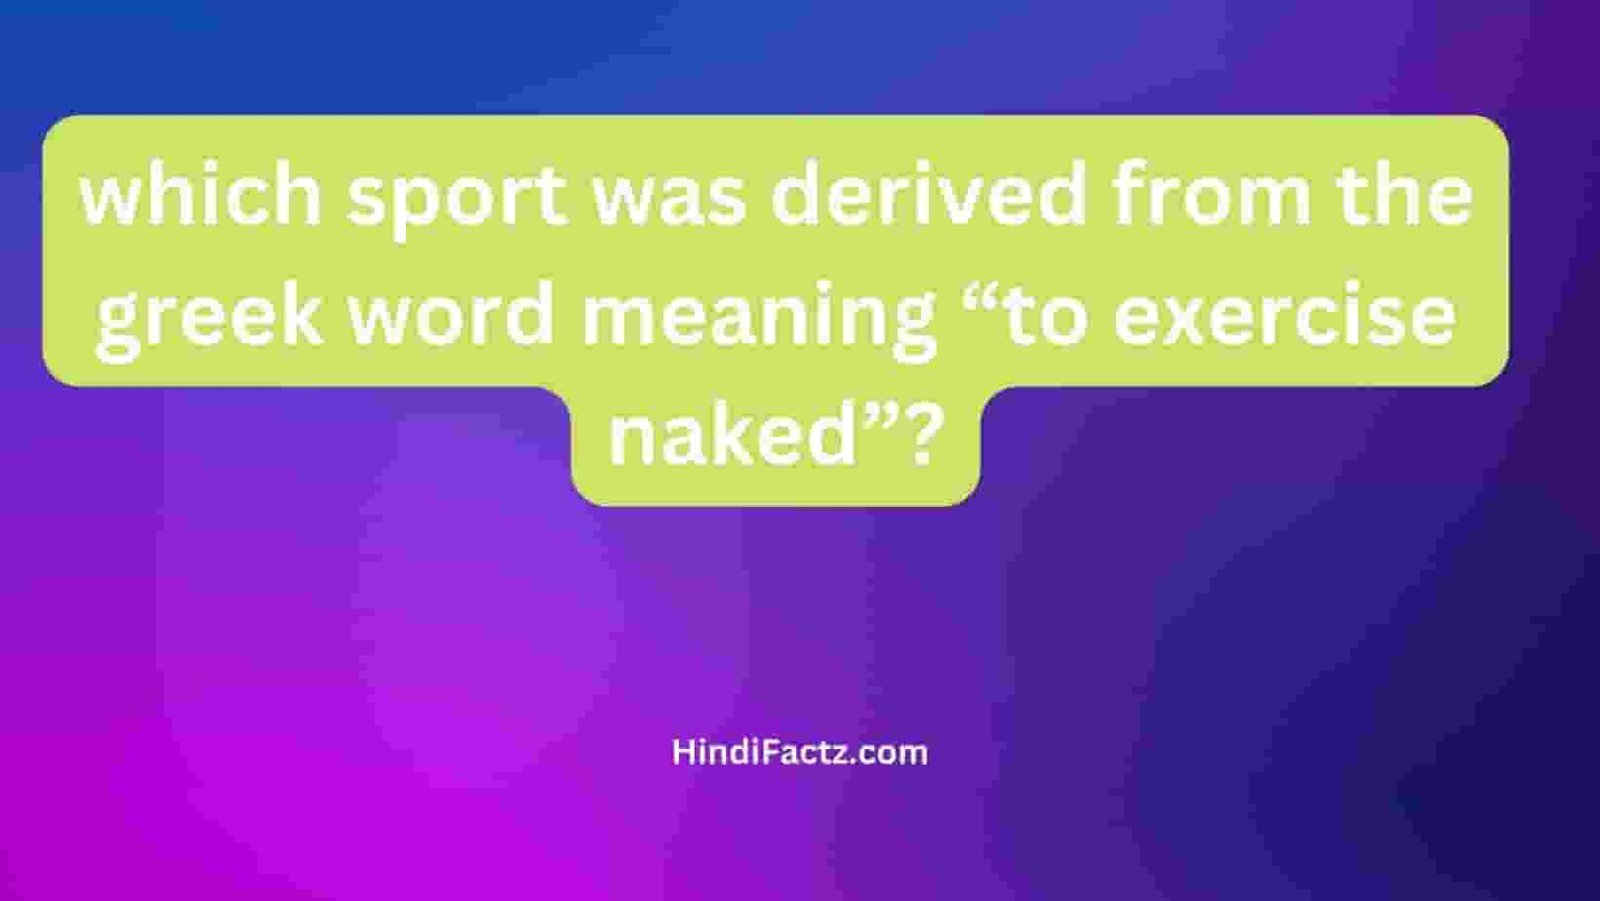 which sport was derived from the greek word meaning “to exercise naked”?